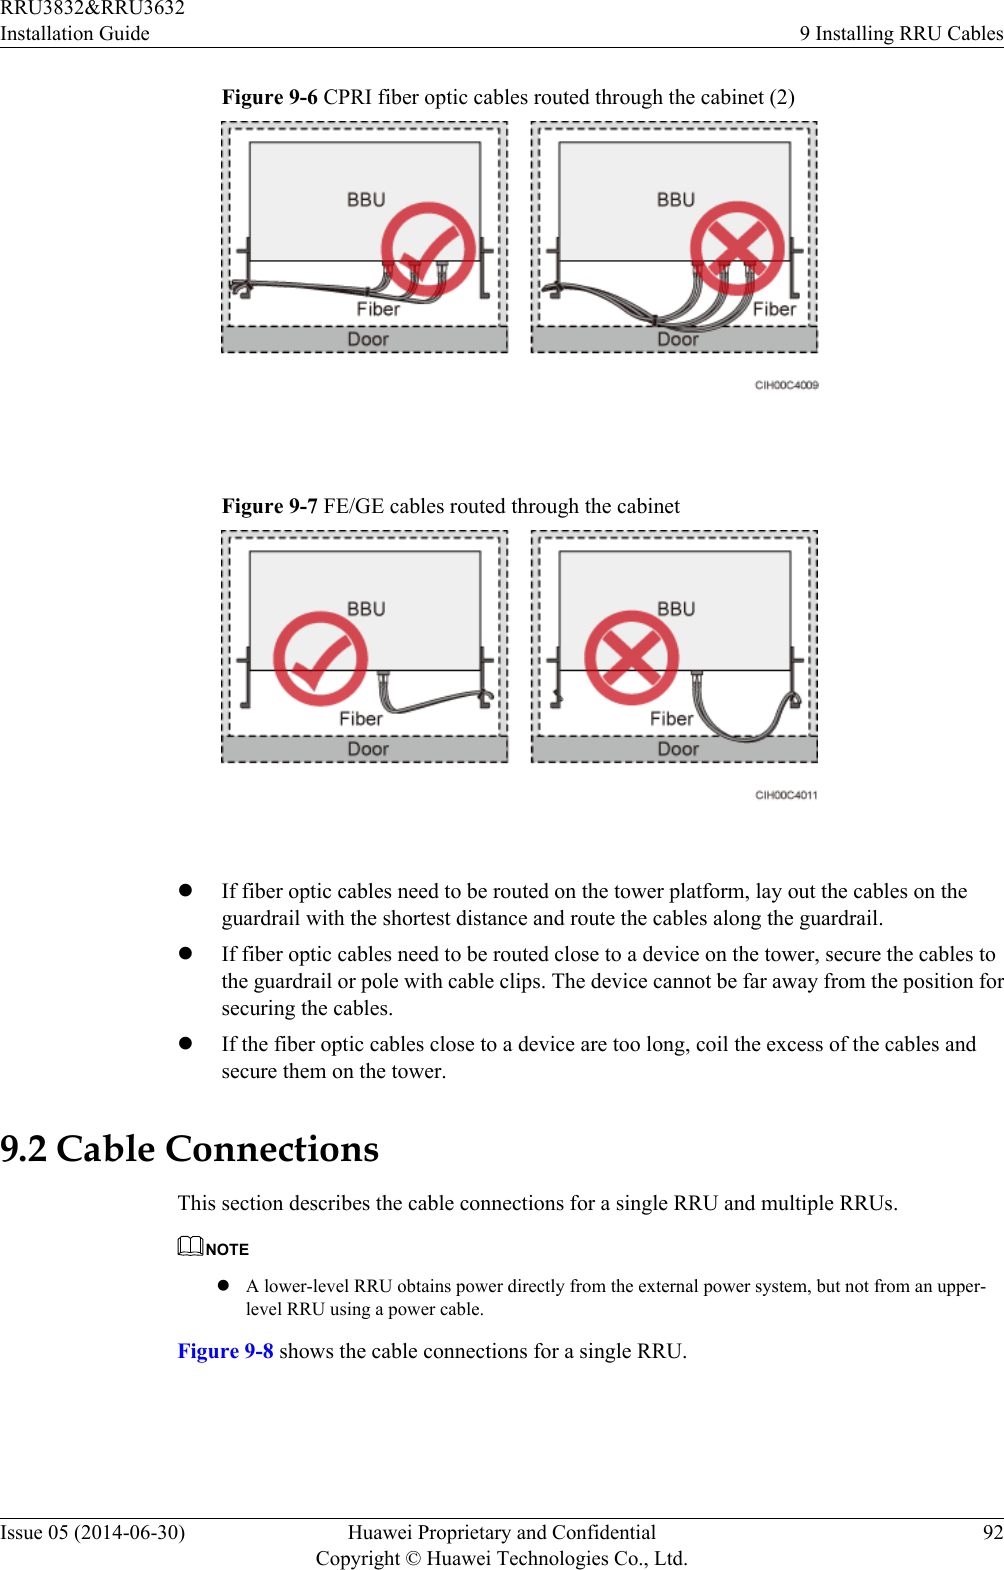 Figure 9-6 CPRI fiber optic cables routed through the cabinet (2) Figure 9-7 FE/GE cables routed through the cabinet lIf fiber optic cables need to be routed on the tower platform, lay out the cables on theguardrail with the shortest distance and route the cables along the guardrail.lIf fiber optic cables need to be routed close to a device on the tower, secure the cables tothe guardrail or pole with cable clips. The device cannot be far away from the position forsecuring the cables.lIf the fiber optic cables close to a device are too long, coil the excess of the cables andsecure them on the tower.9.2 Cable ConnectionsThis section describes the cable connections for a single RRU and multiple RRUs.NOTElA lower-level RRU obtains power directly from the external power system, but not from an upper-level RRU using a power cable.Figure 9-8 shows the cable connections for a single RRU.RRU3832&amp;RRU3632Installation Guide 9 Installing RRU CablesIssue 05 (2014-06-30) Huawei Proprietary and ConfidentialCopyright © Huawei Technologies Co., Ltd.92